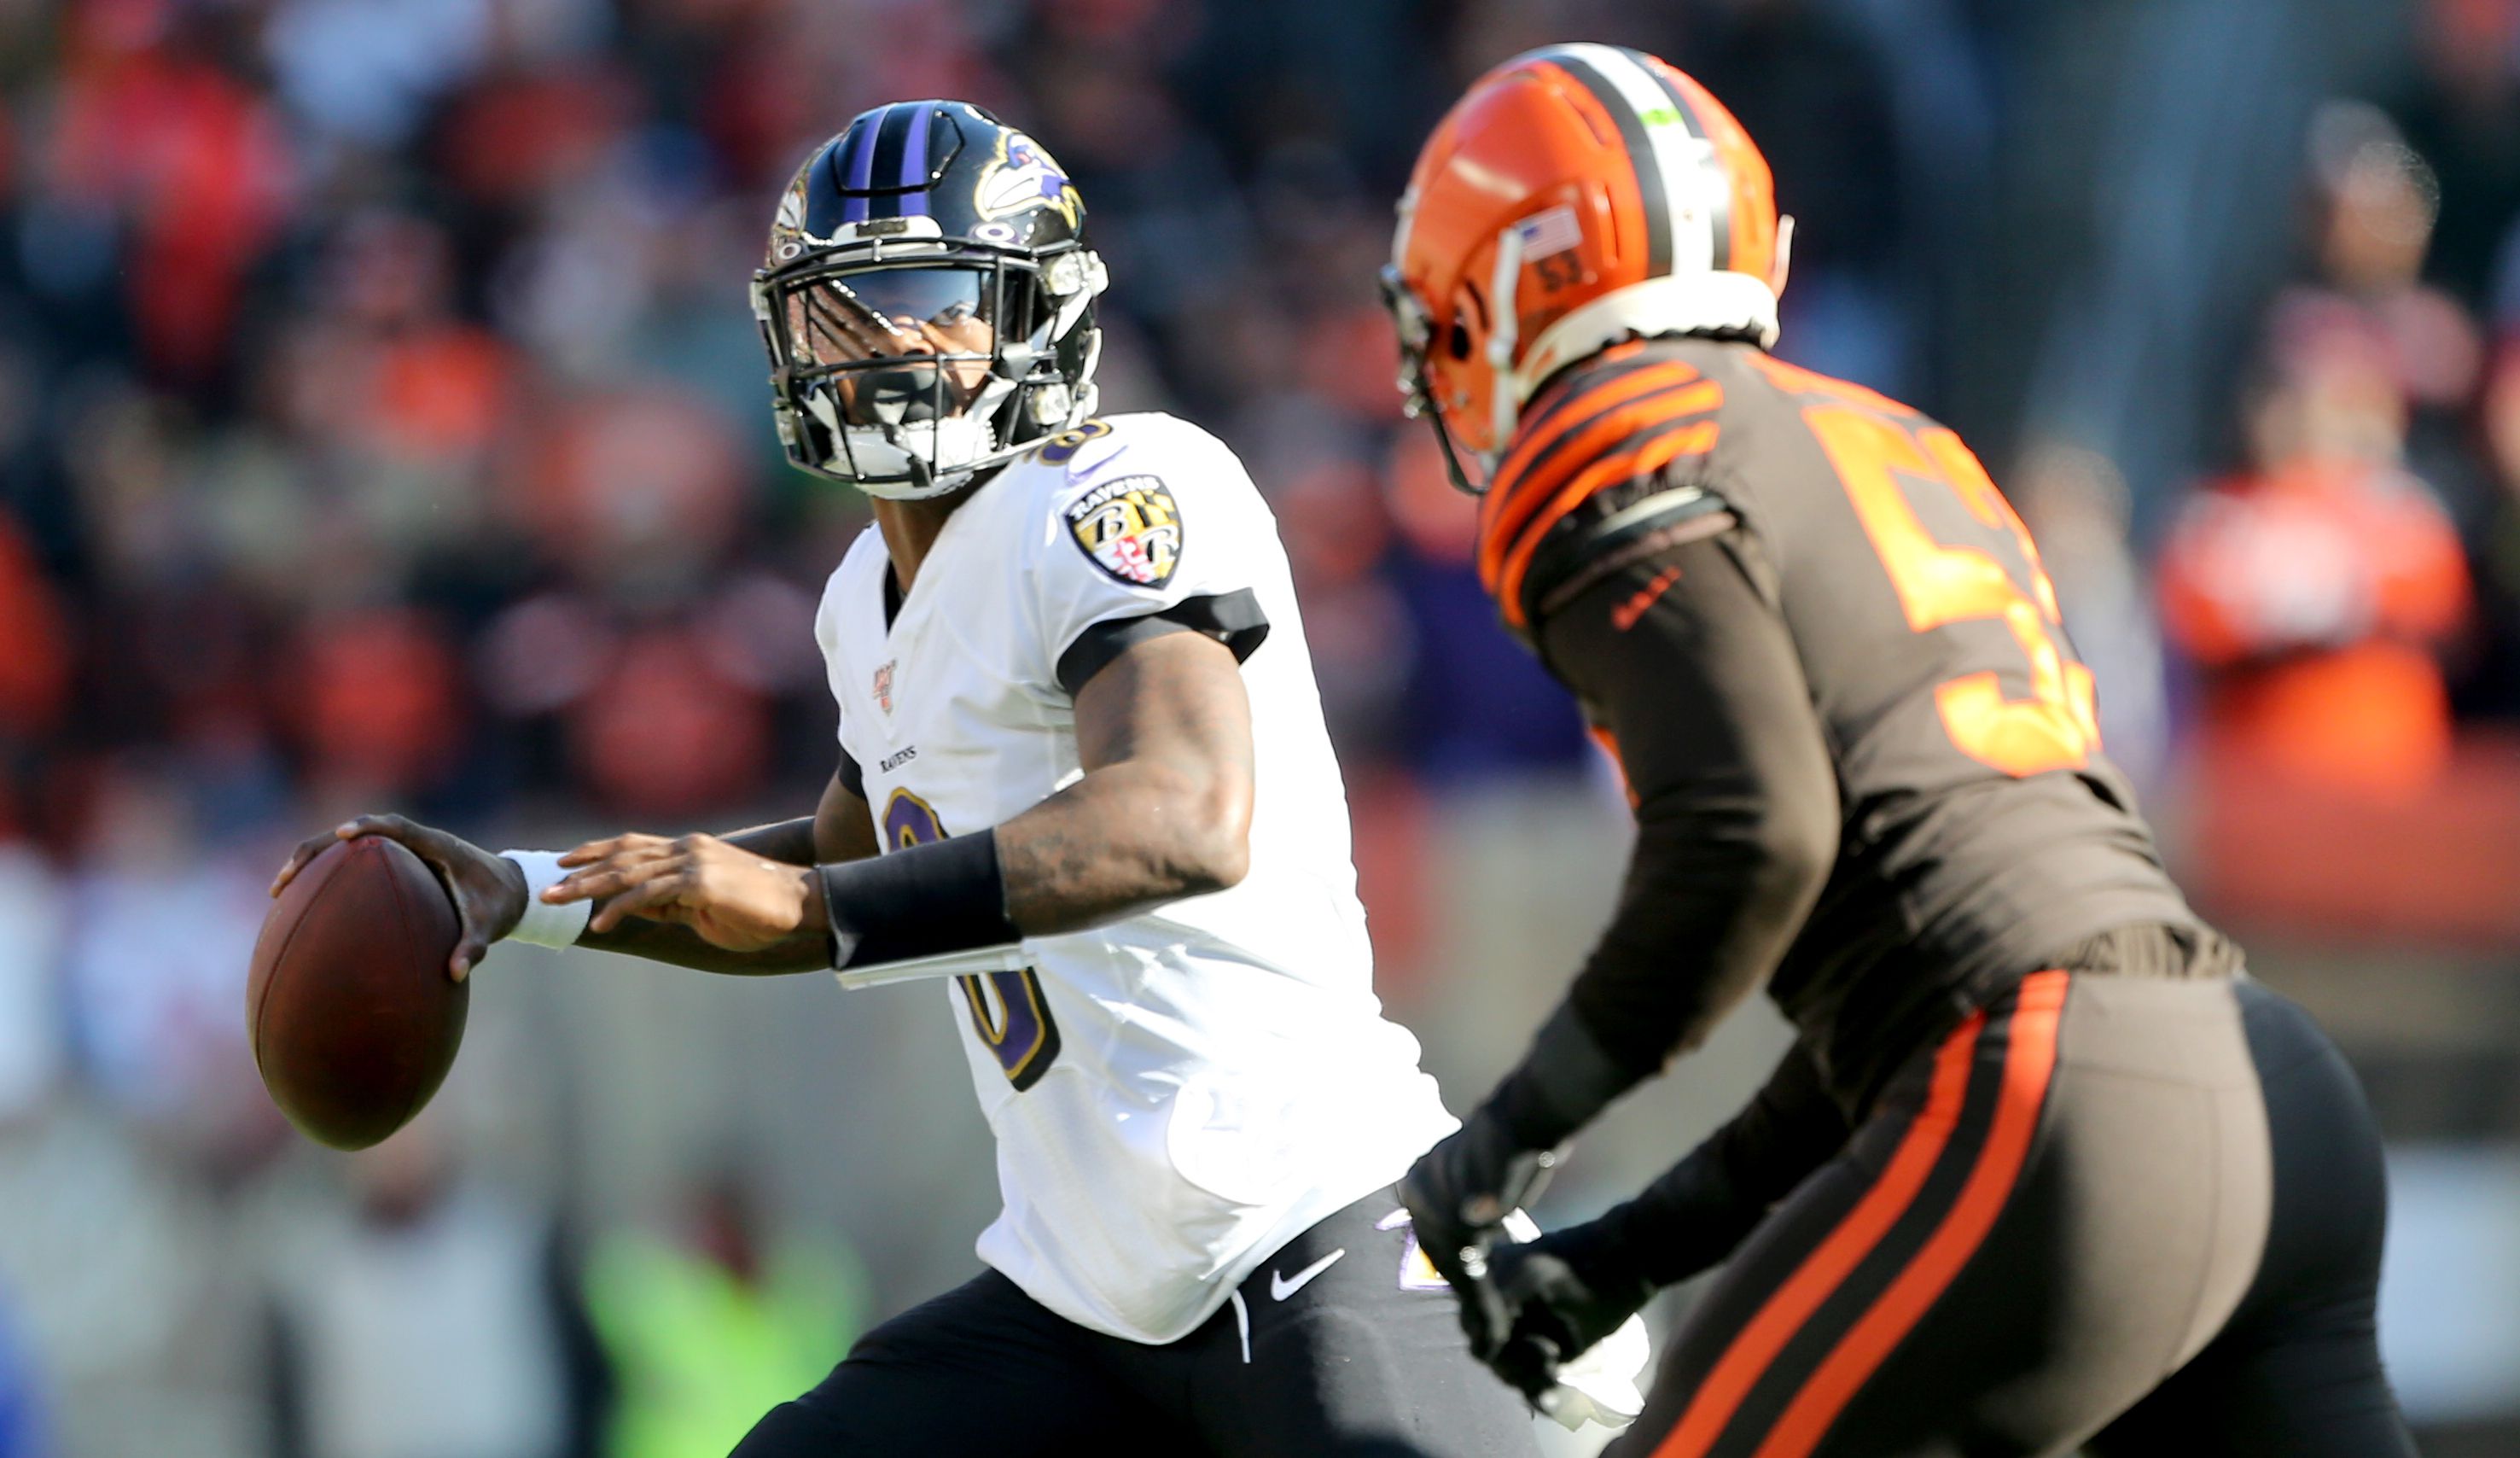 Game of the Week: Baltimore Ravens vs. Cleveland Browns 